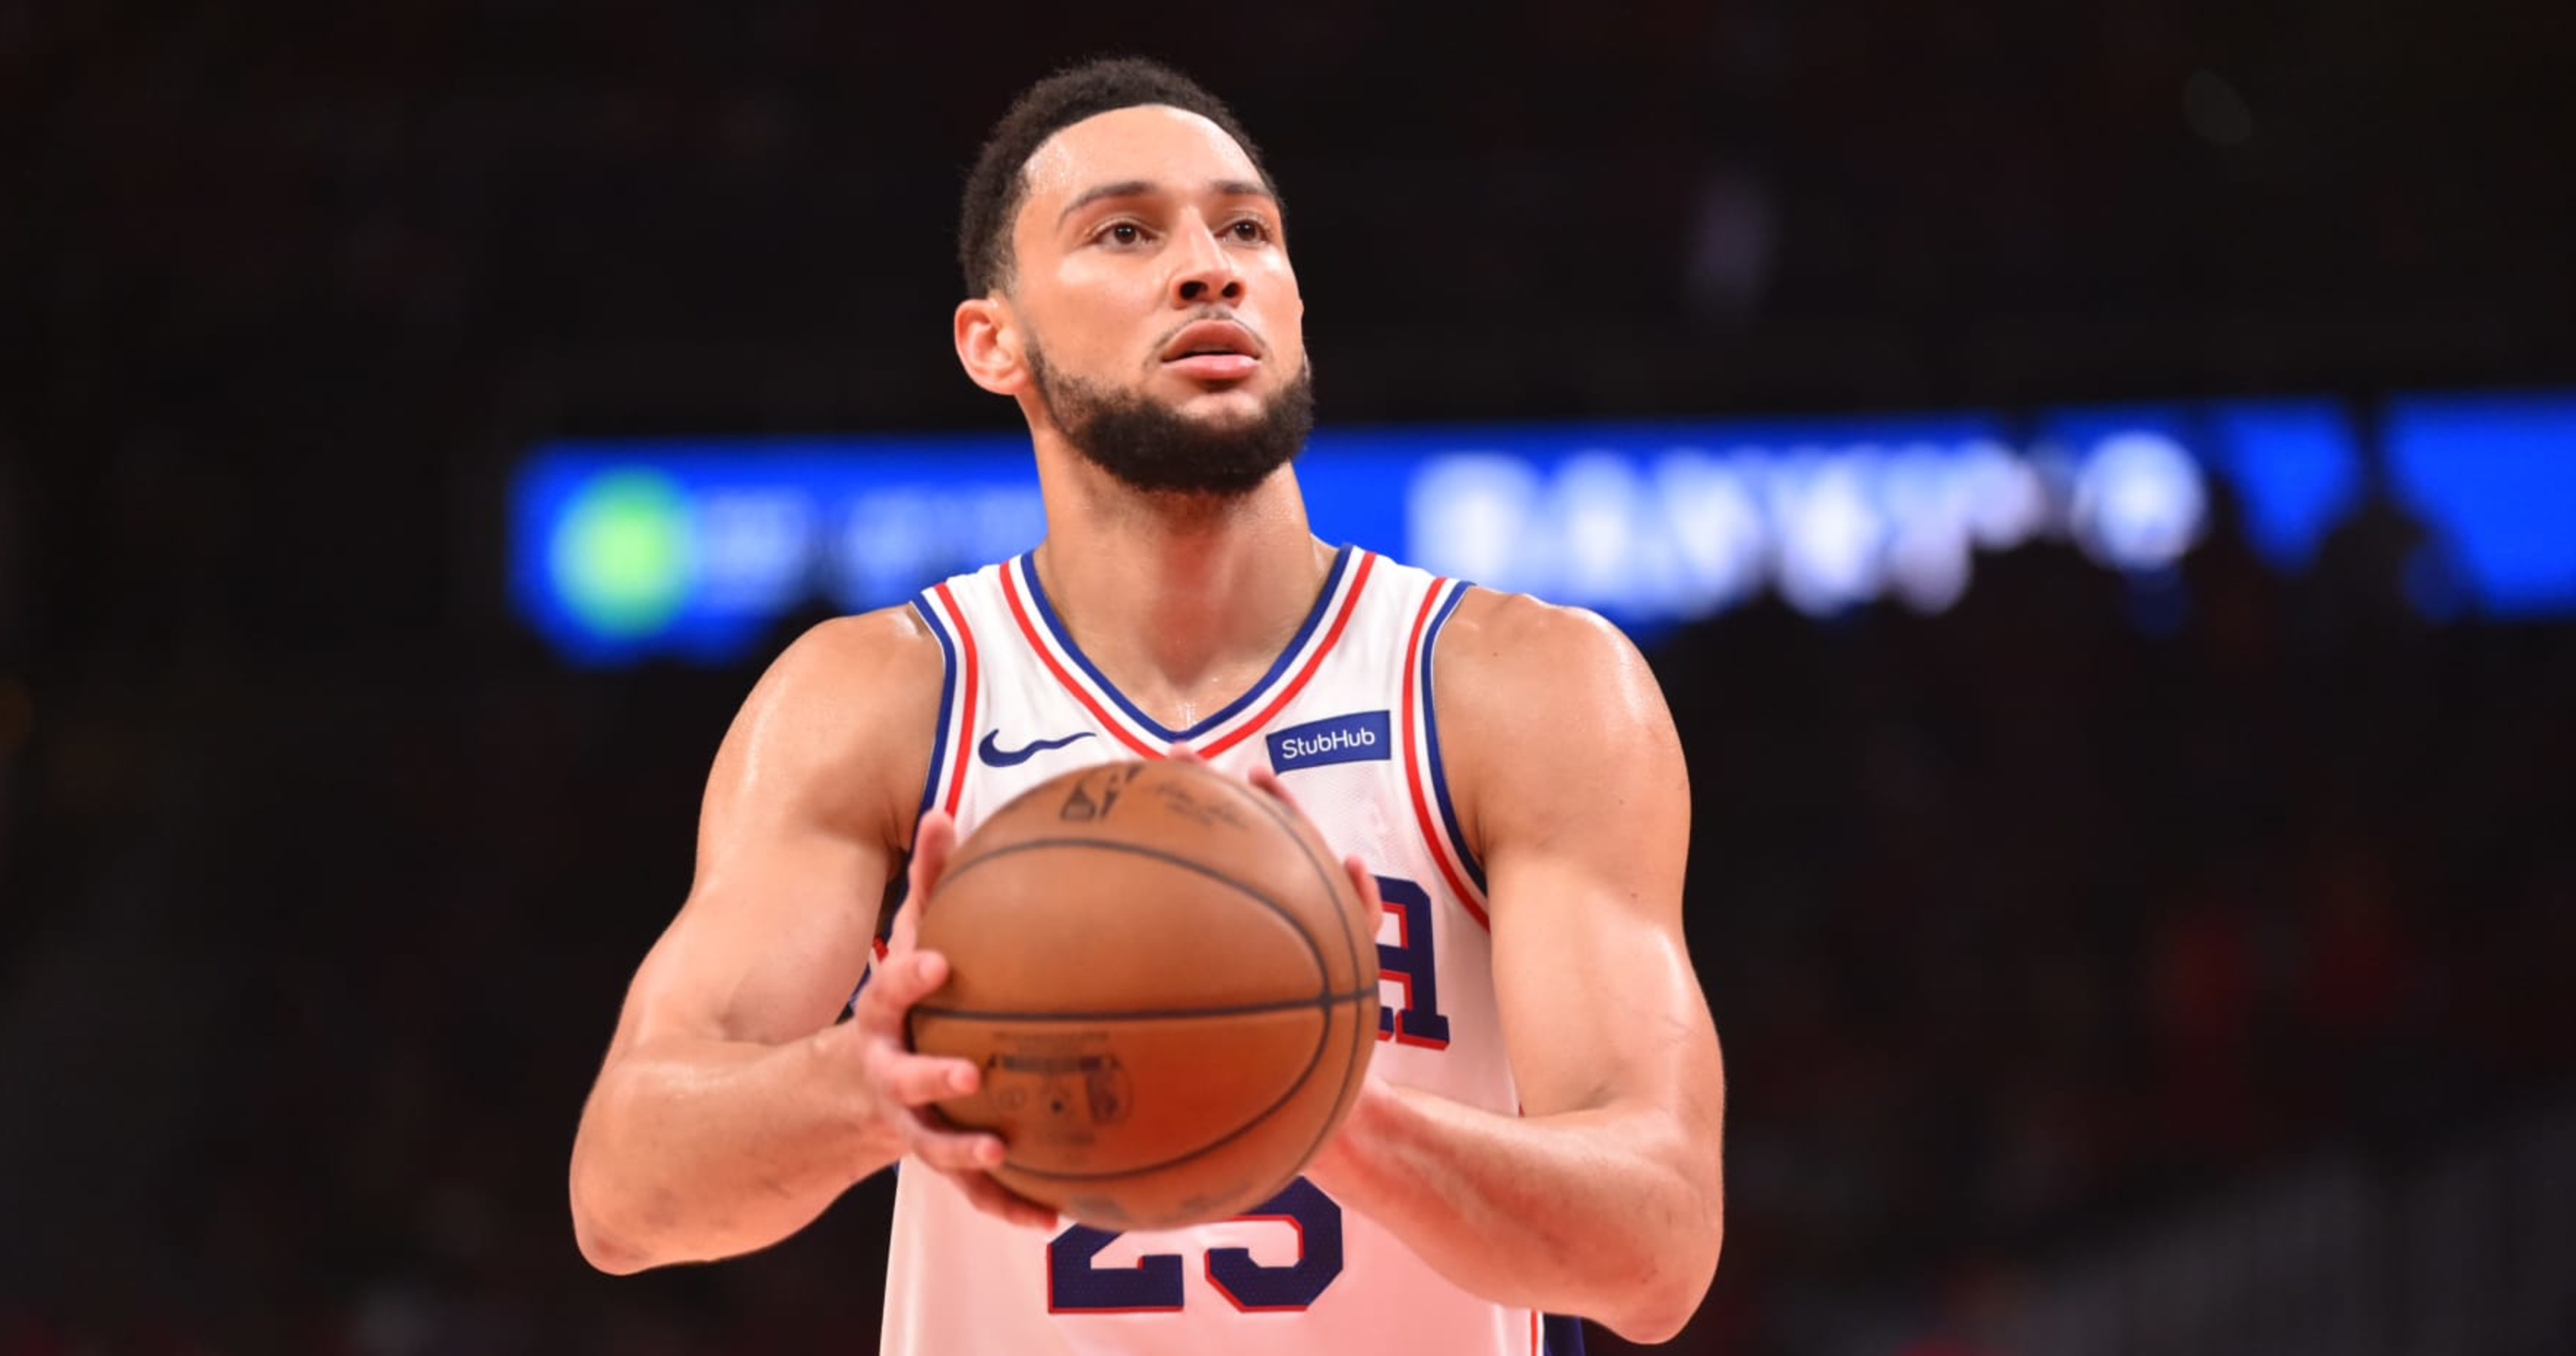 Is Ben Simmons' shooting motion flawed, or does he just lack confidence  when shooting? - Quora